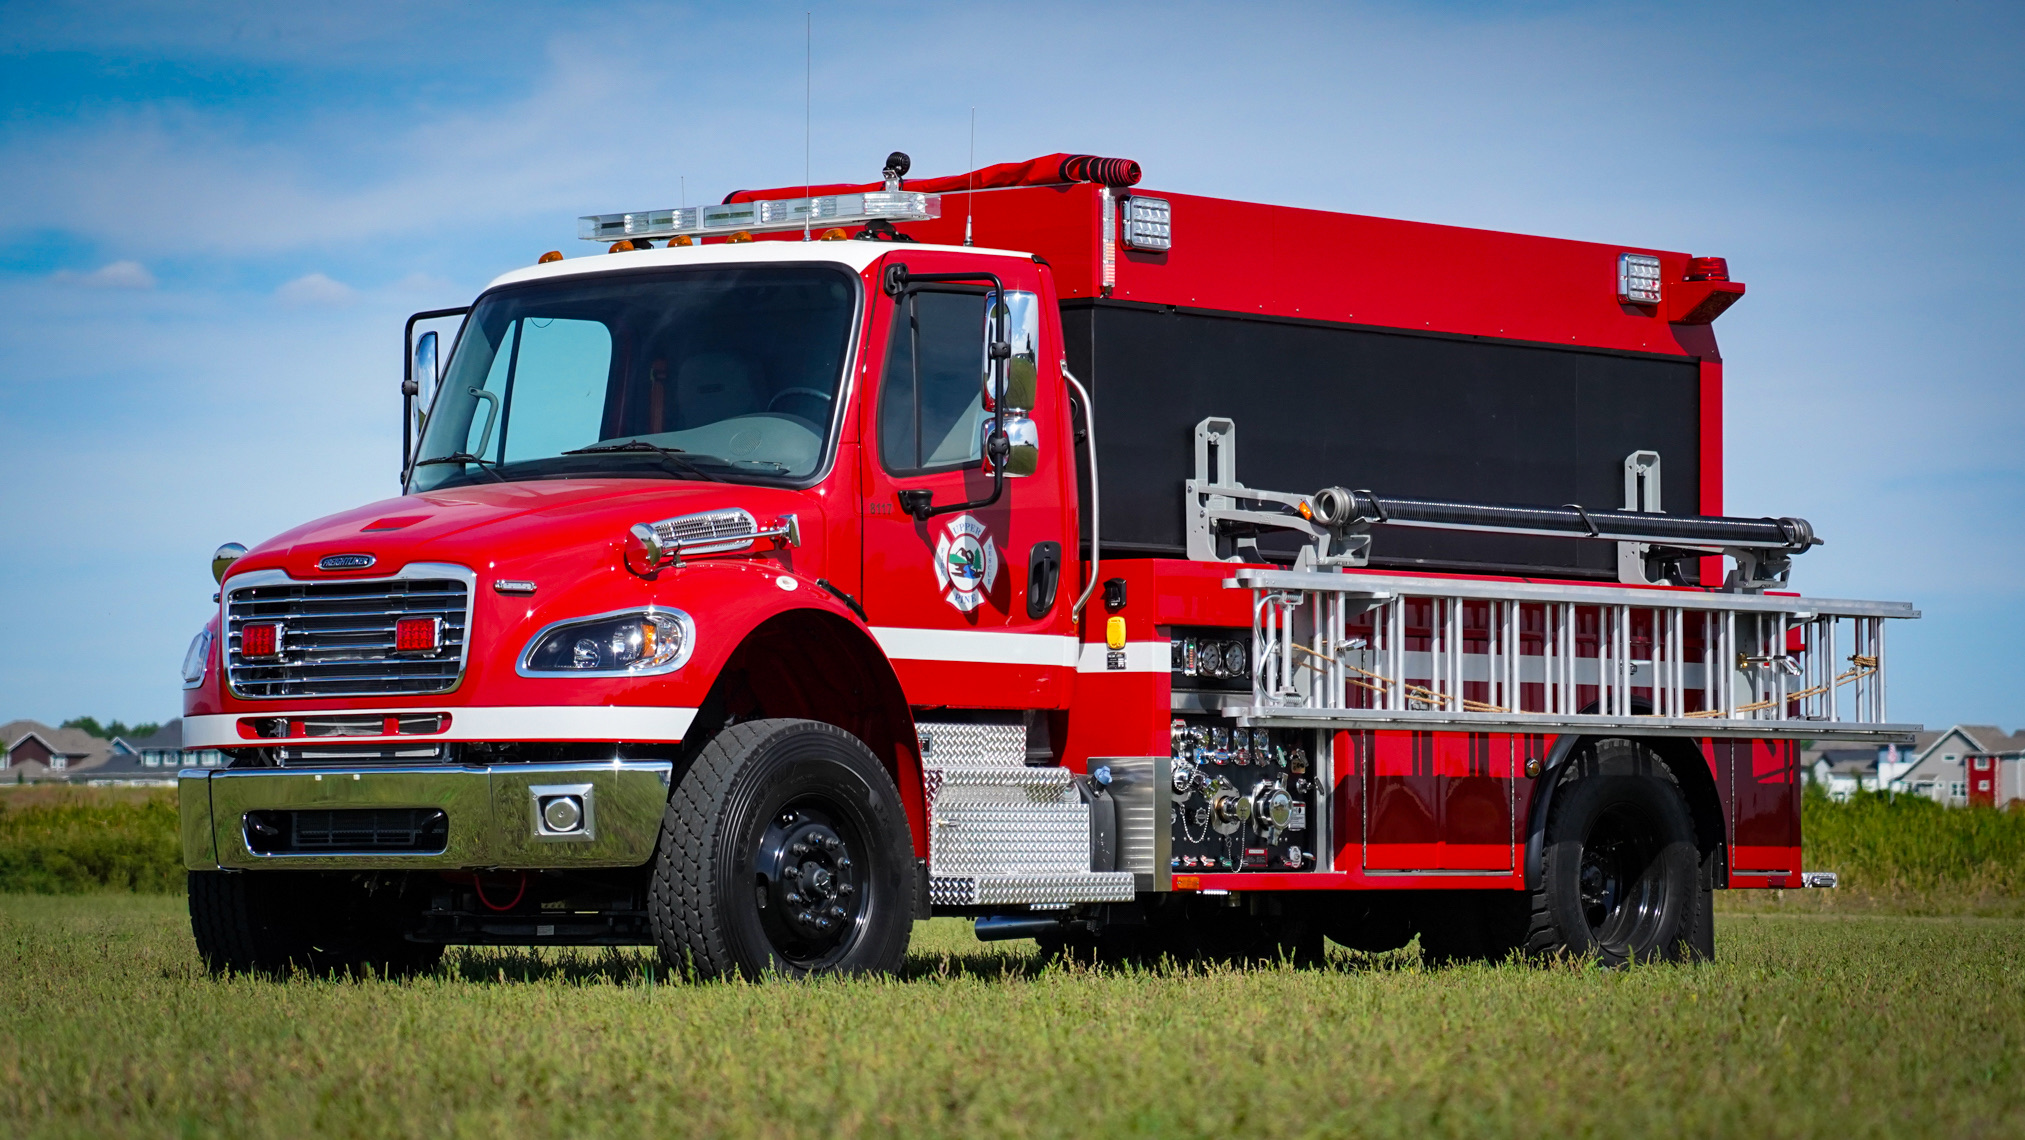 Featured image for “Upper Pine River Fire Protection District, Bayfield (CO) Water Supply #1224”